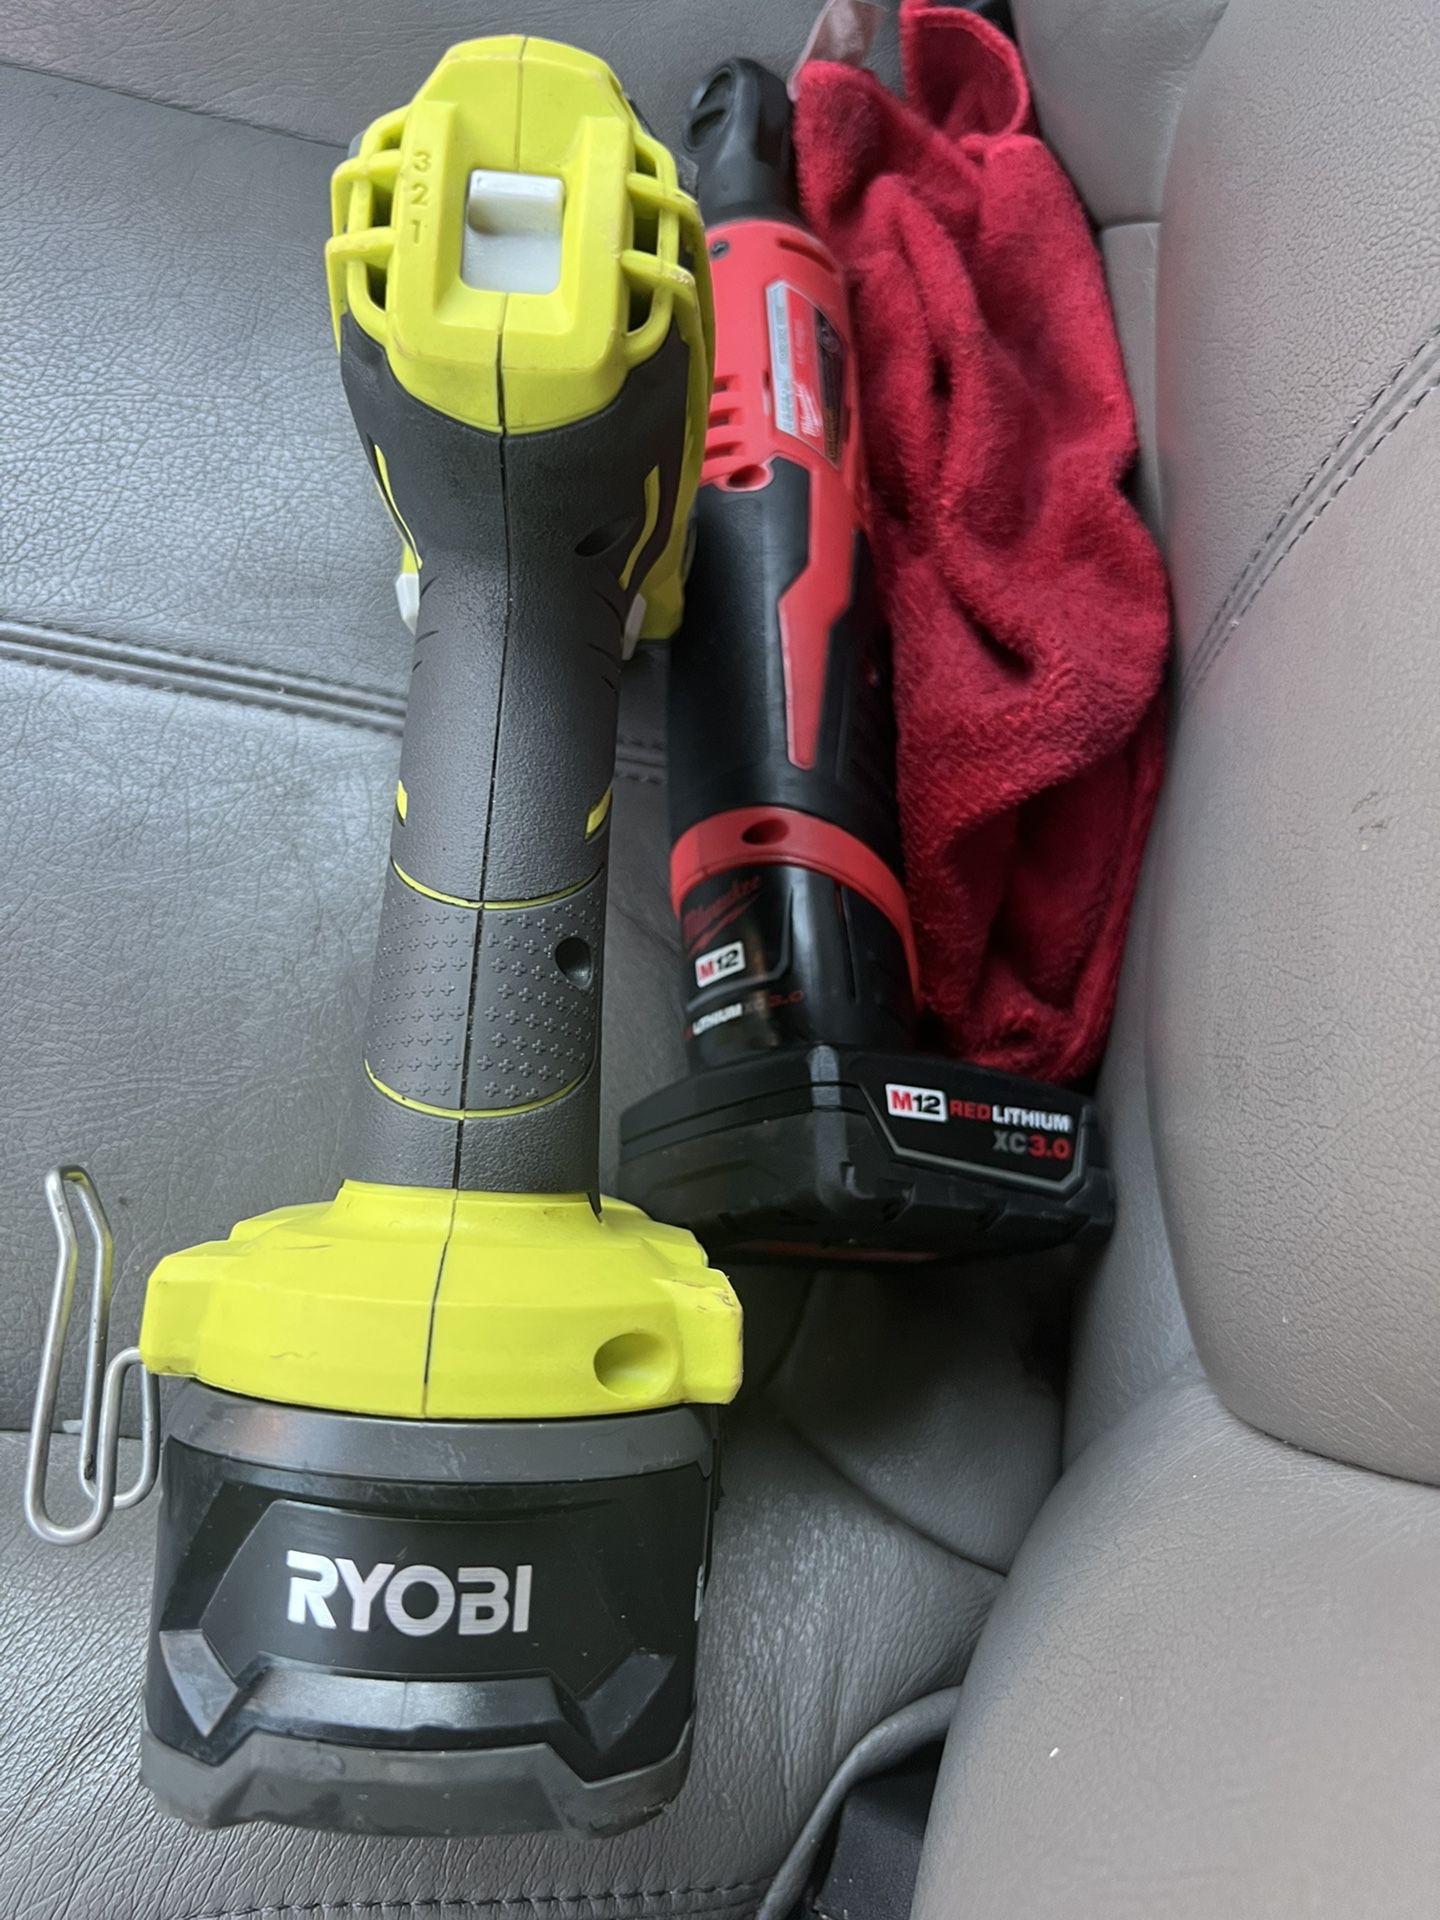 Only Ryobi comes with its battery and charger. S